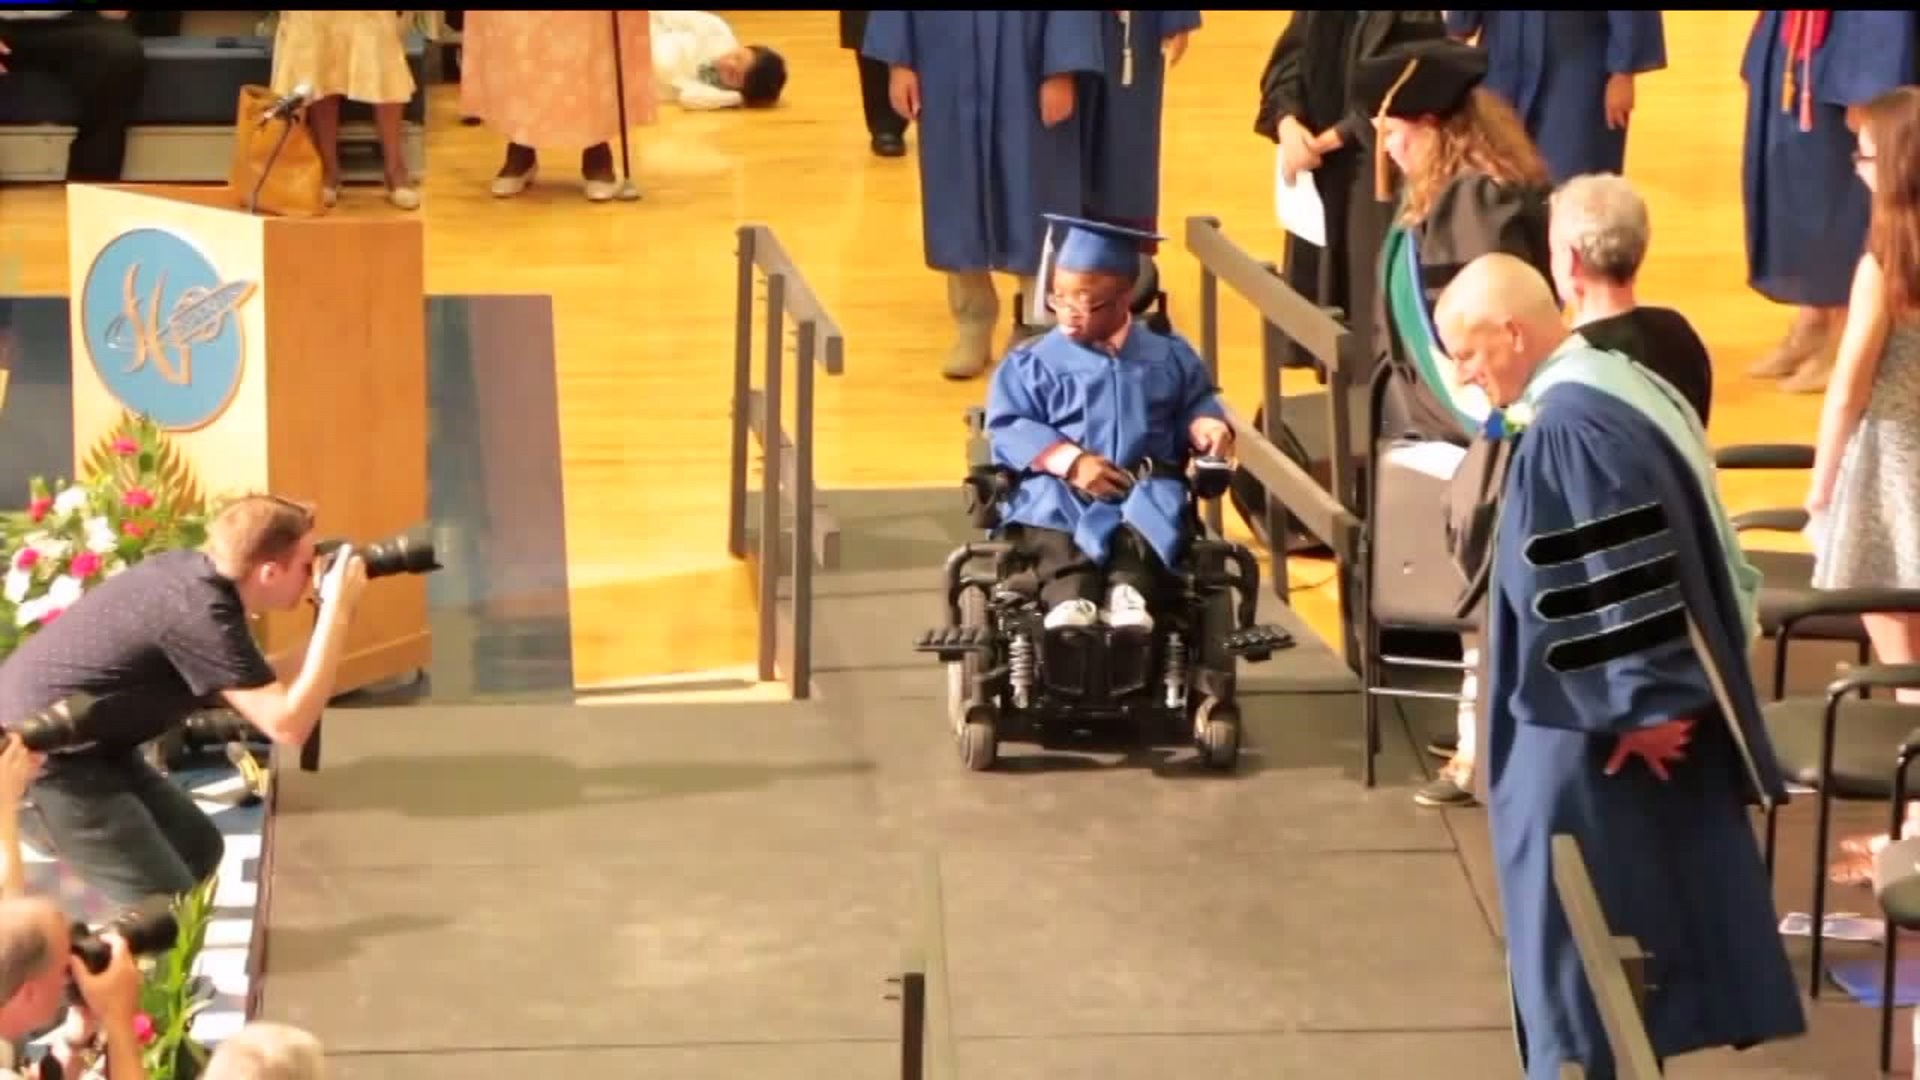 Student with rare genetic disorder walks at graduation